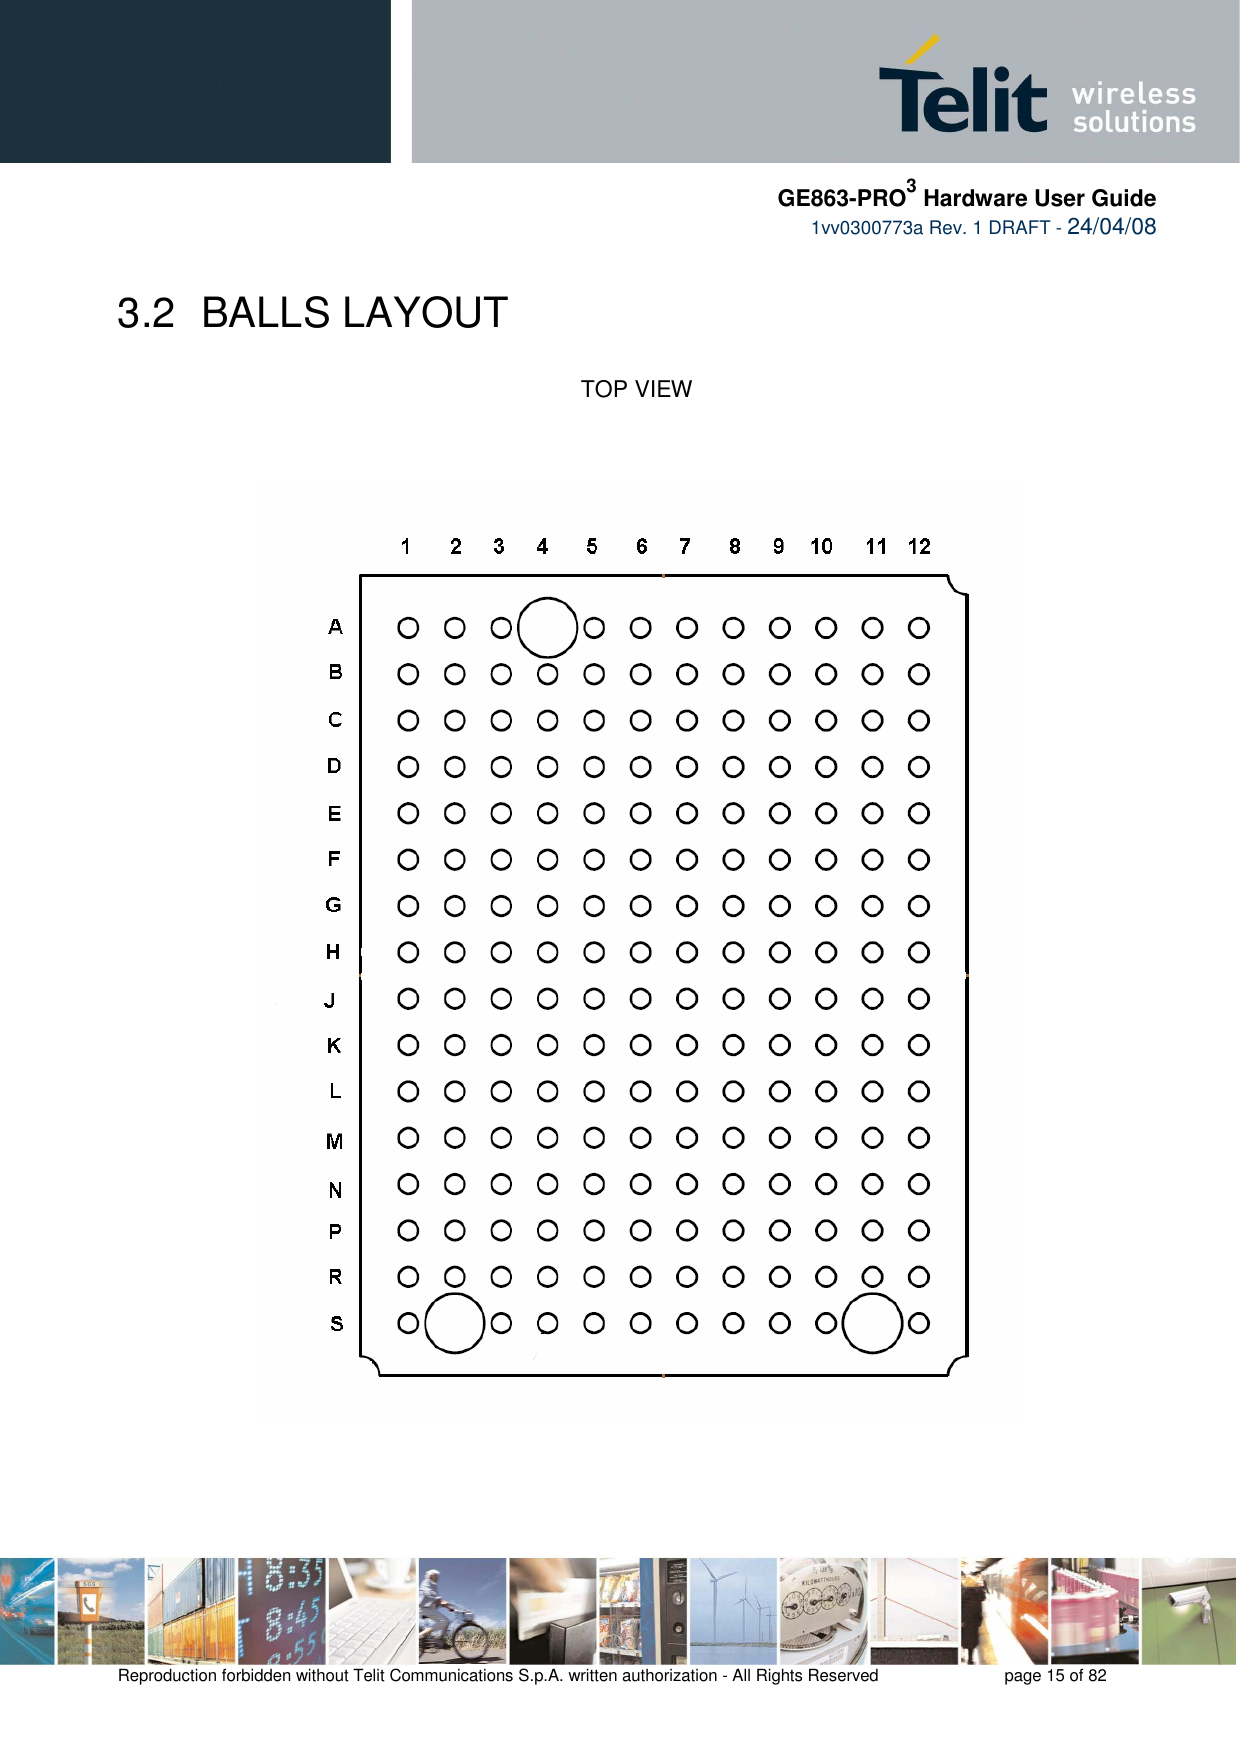     GE863-PRO3 Hardware User Guide  1vv0300773a Rev. 1 DRAFT - 24/04/08    Reproduction forbidden without Telit Communications S.p.A. written authorization - All Rights Reserved    page 15 of 82  3.2  BALLS LAYOUT  TOP VIEW     